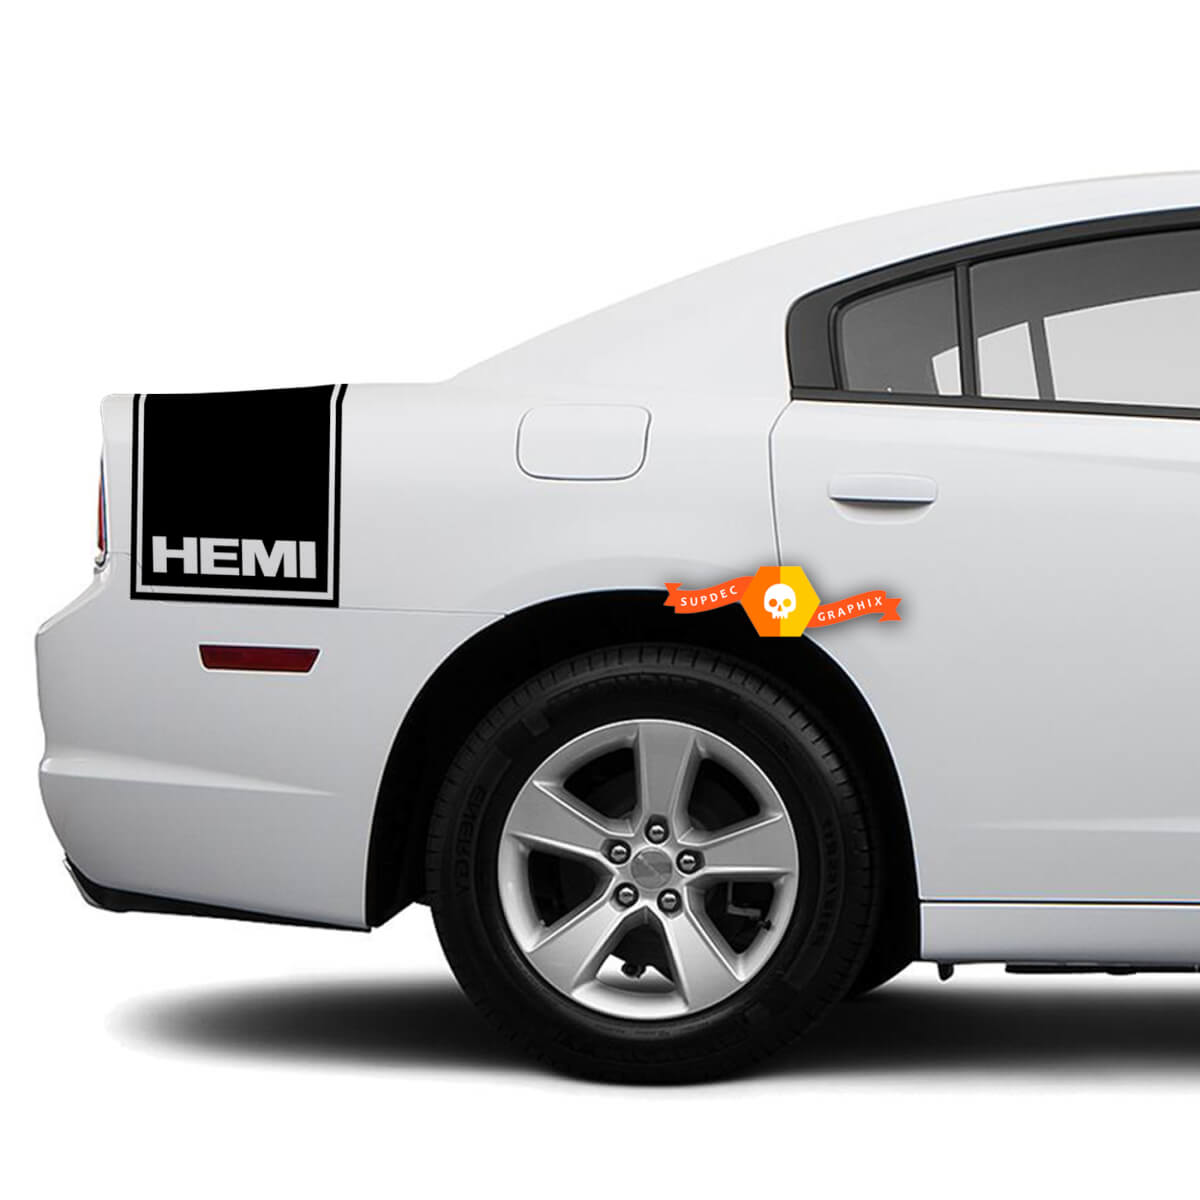 Dodge Charger Rear side Band Decal Sticker Hemi graphics fits to models 2011-2014